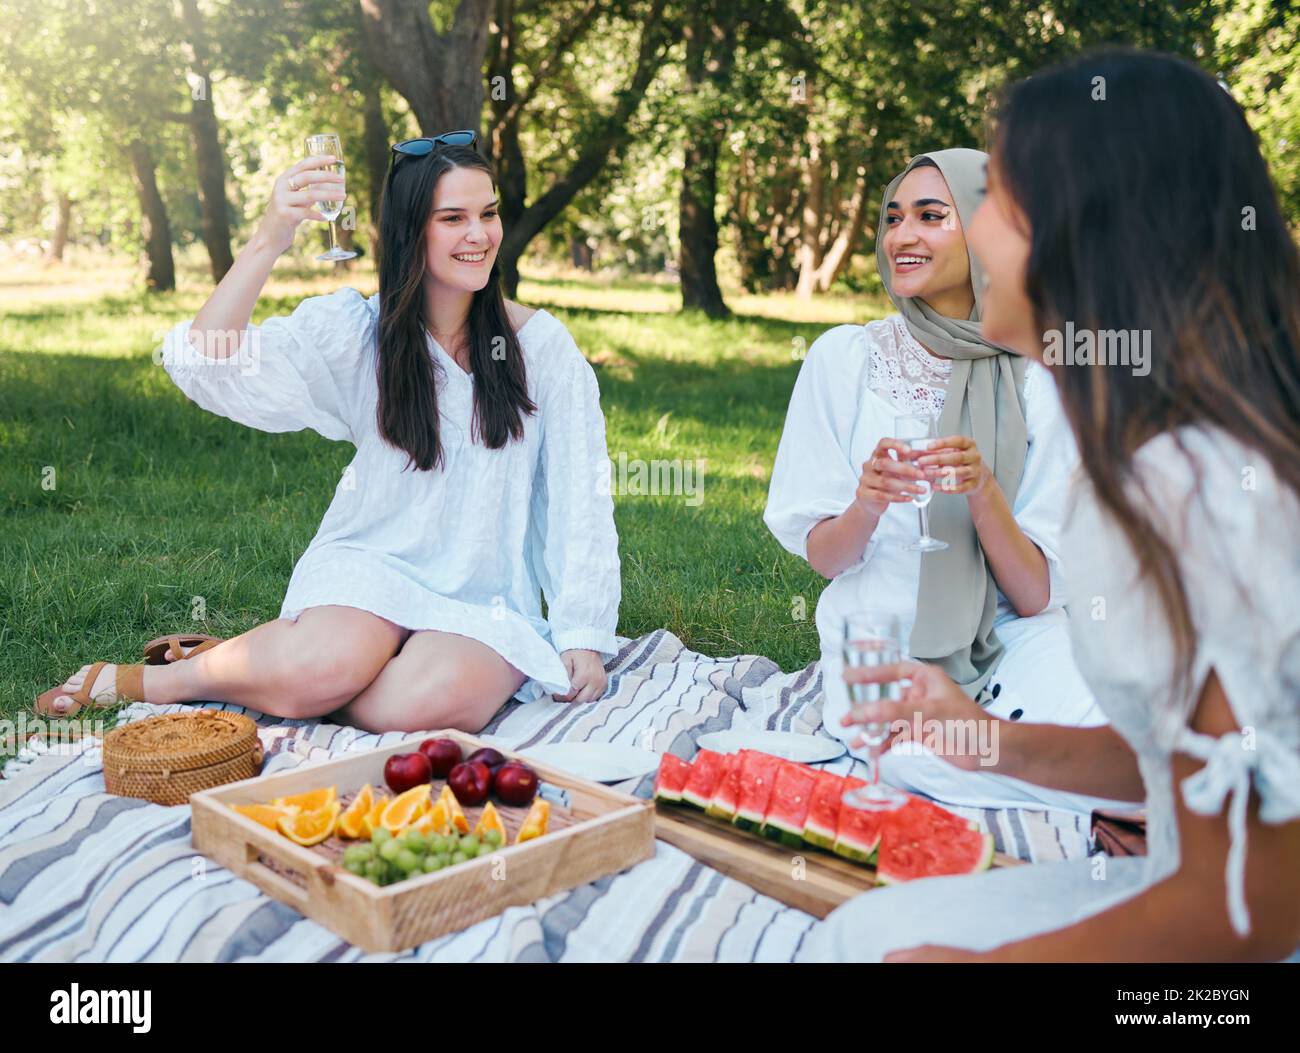 Picnic, champagne and women toast in a park outdoors in summer, Food, drink and a happy group of friends in nature on the weekend. Diversity Stock Photo